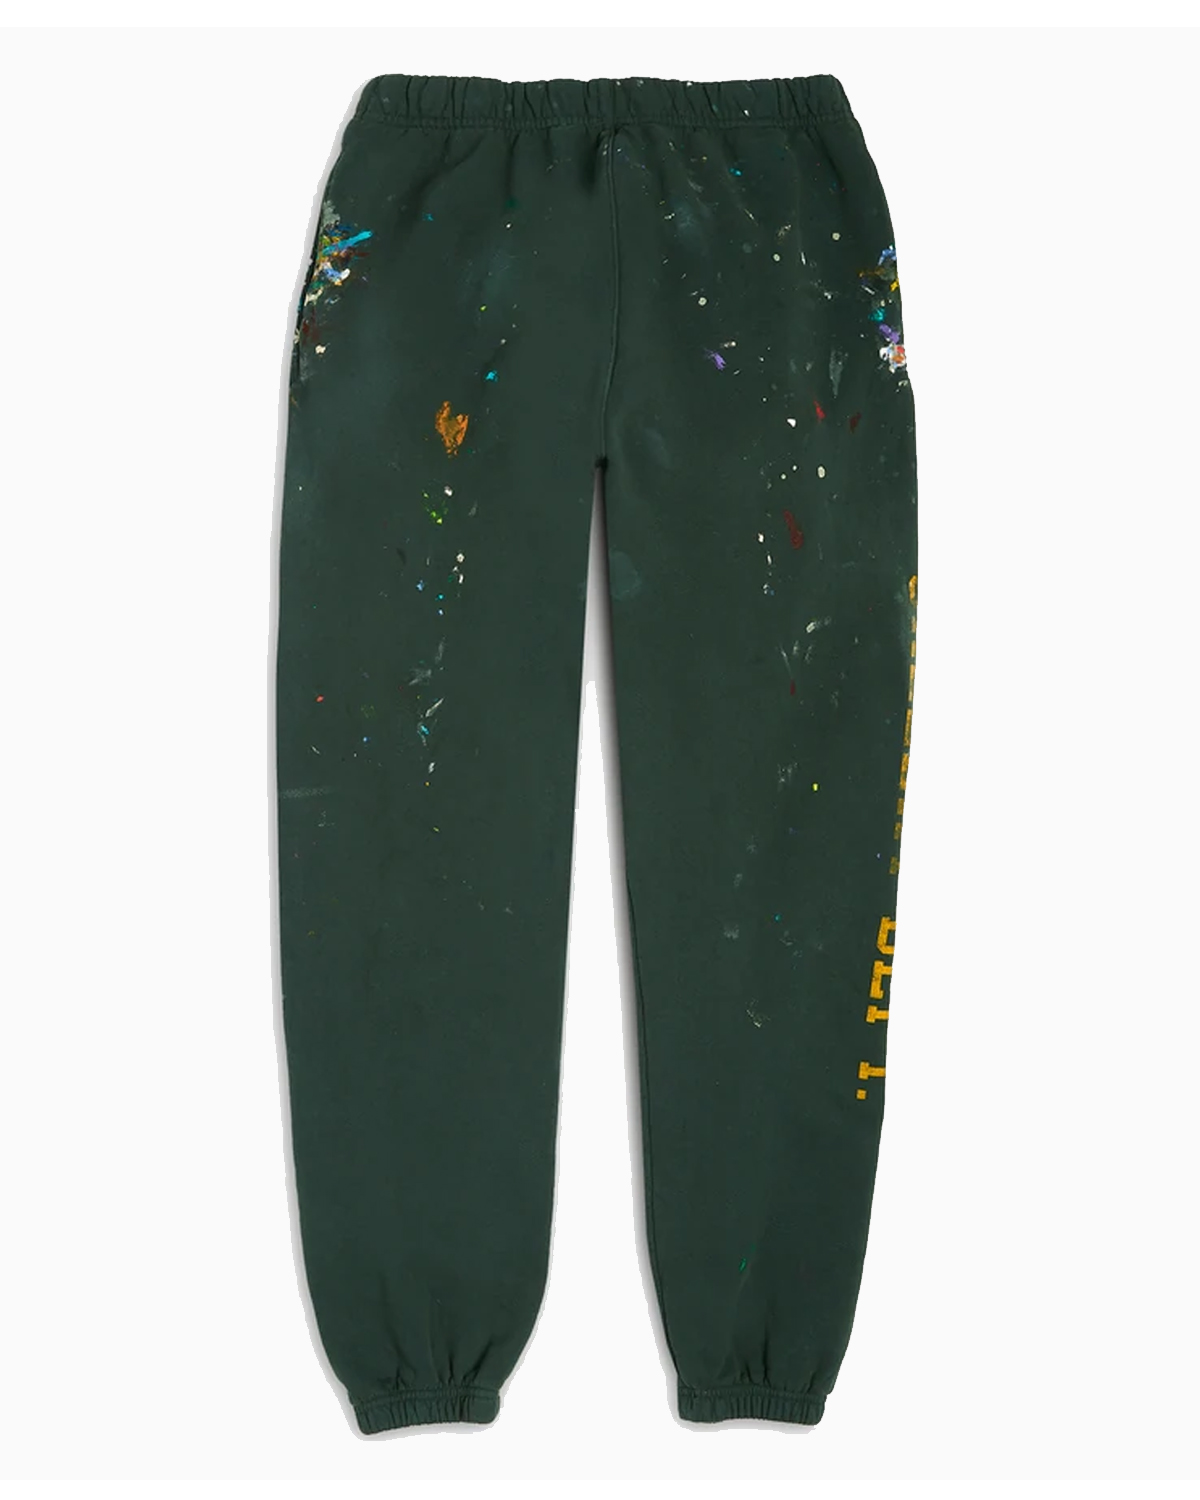 Gallery Dept. Painted Property Sweat Pants Green for Women